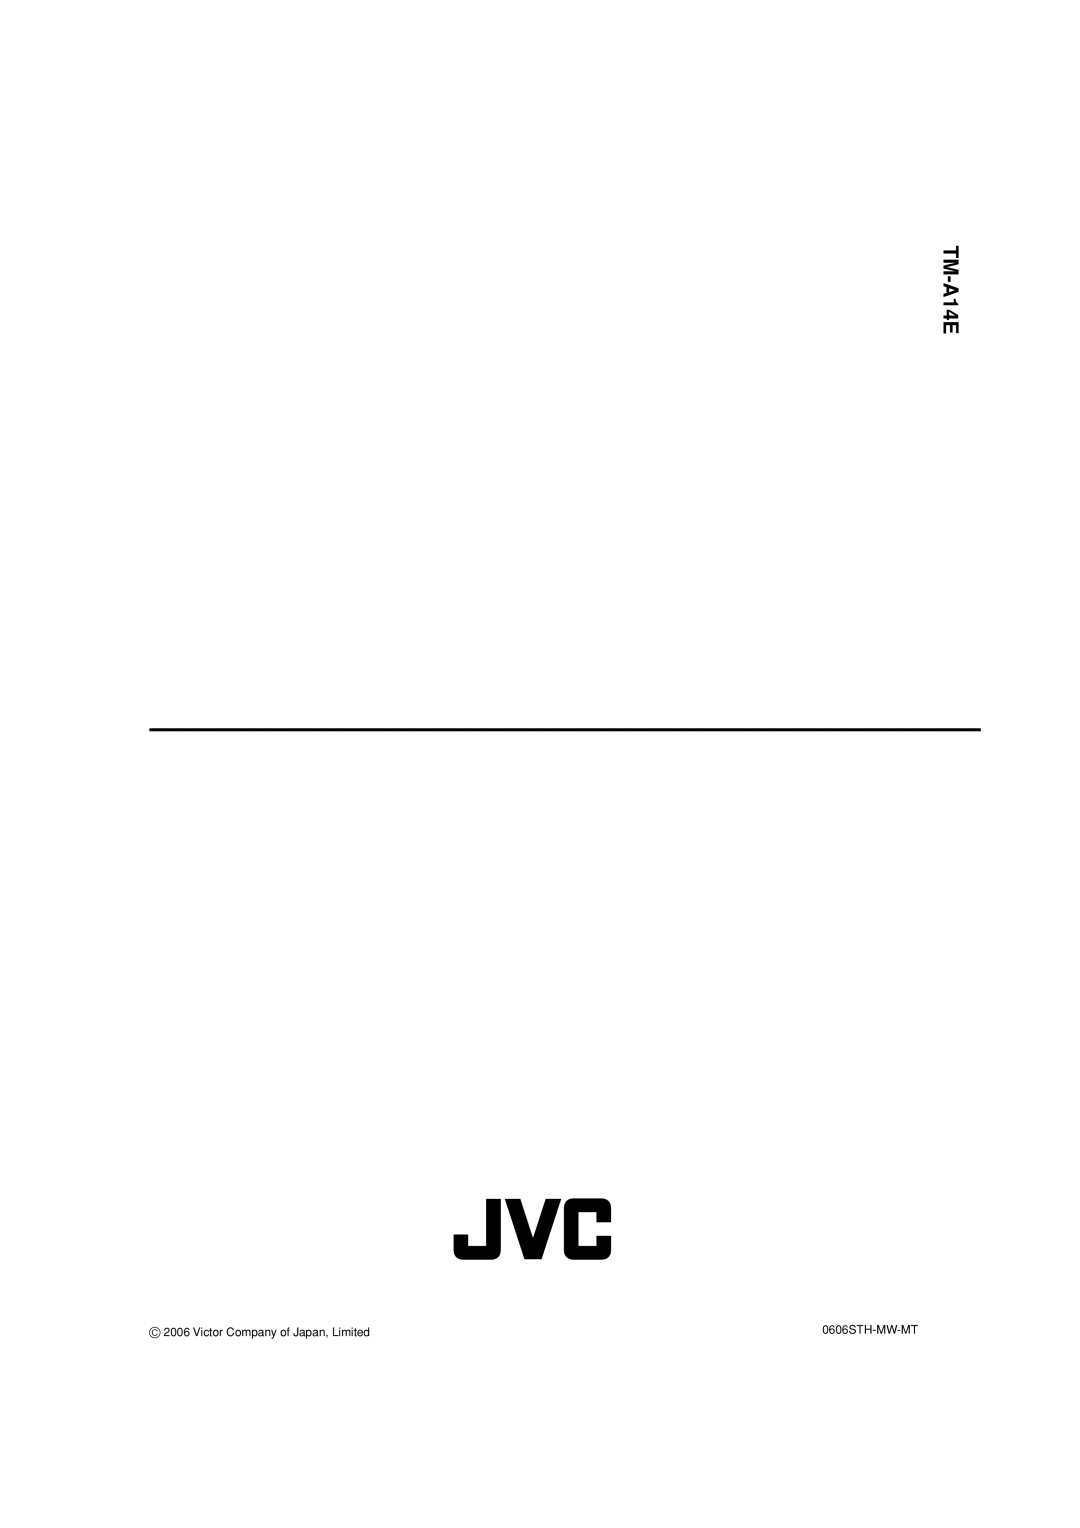 JVC LCT2141-001A-H manual TM-A14E, Victor Company of Japan, Limited, 0606STH-MW-MT 